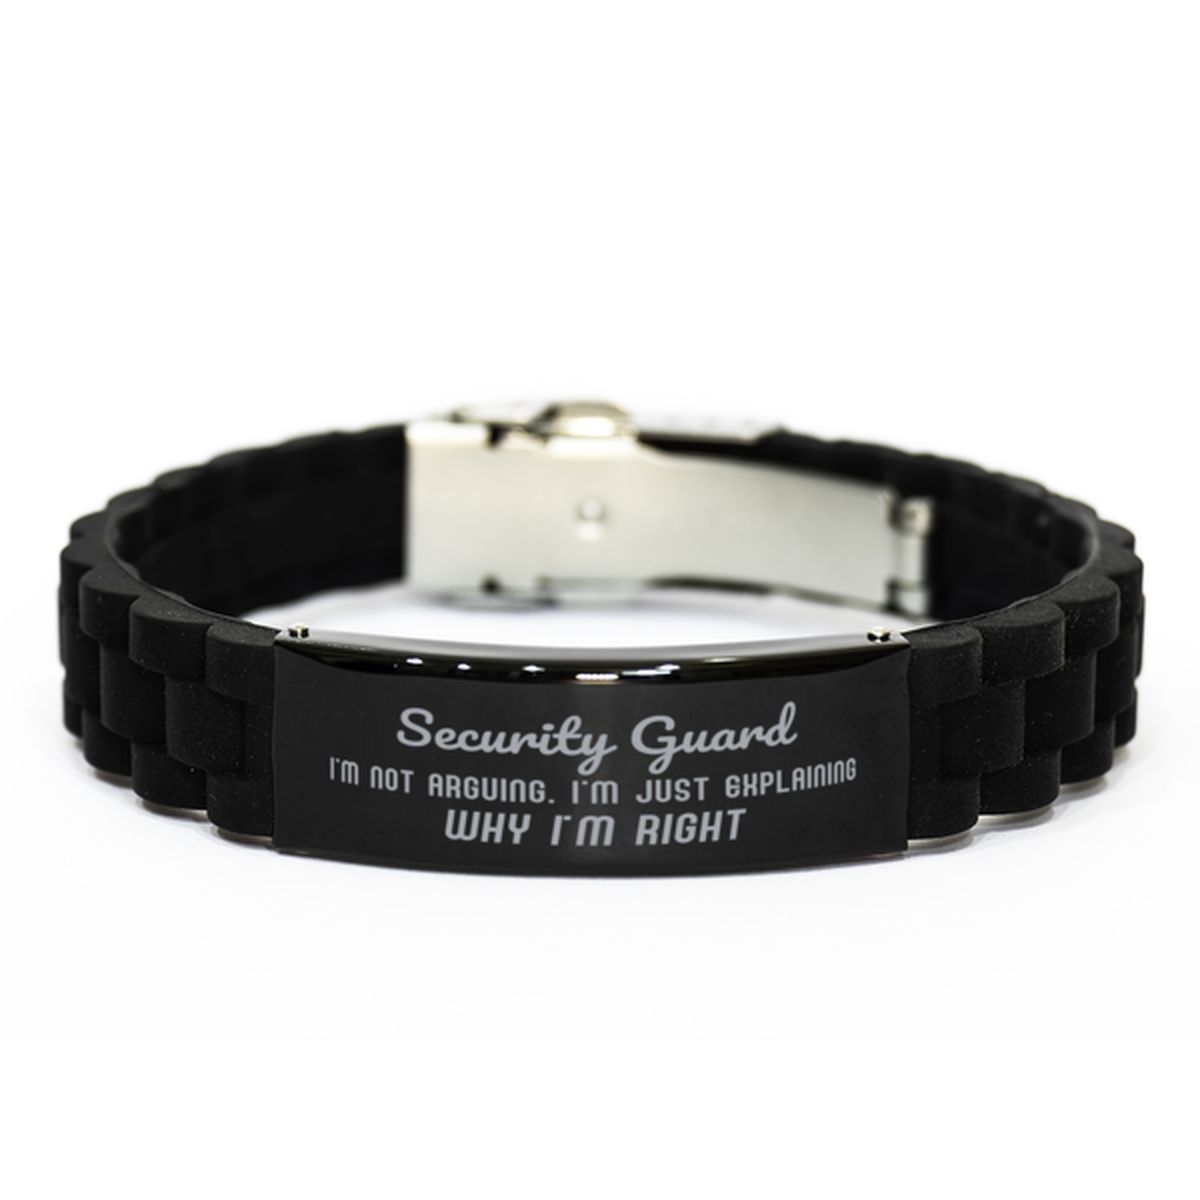 Security Guard I'm not Arguing. I'm Just Explaining Why I'm RIGHT Black Glidelock Clasp Bracelet, Funny Saying Quote Security Guard Gifts For Security Guard Graduation Birthday Christmas Gifts for Men Women Coworker